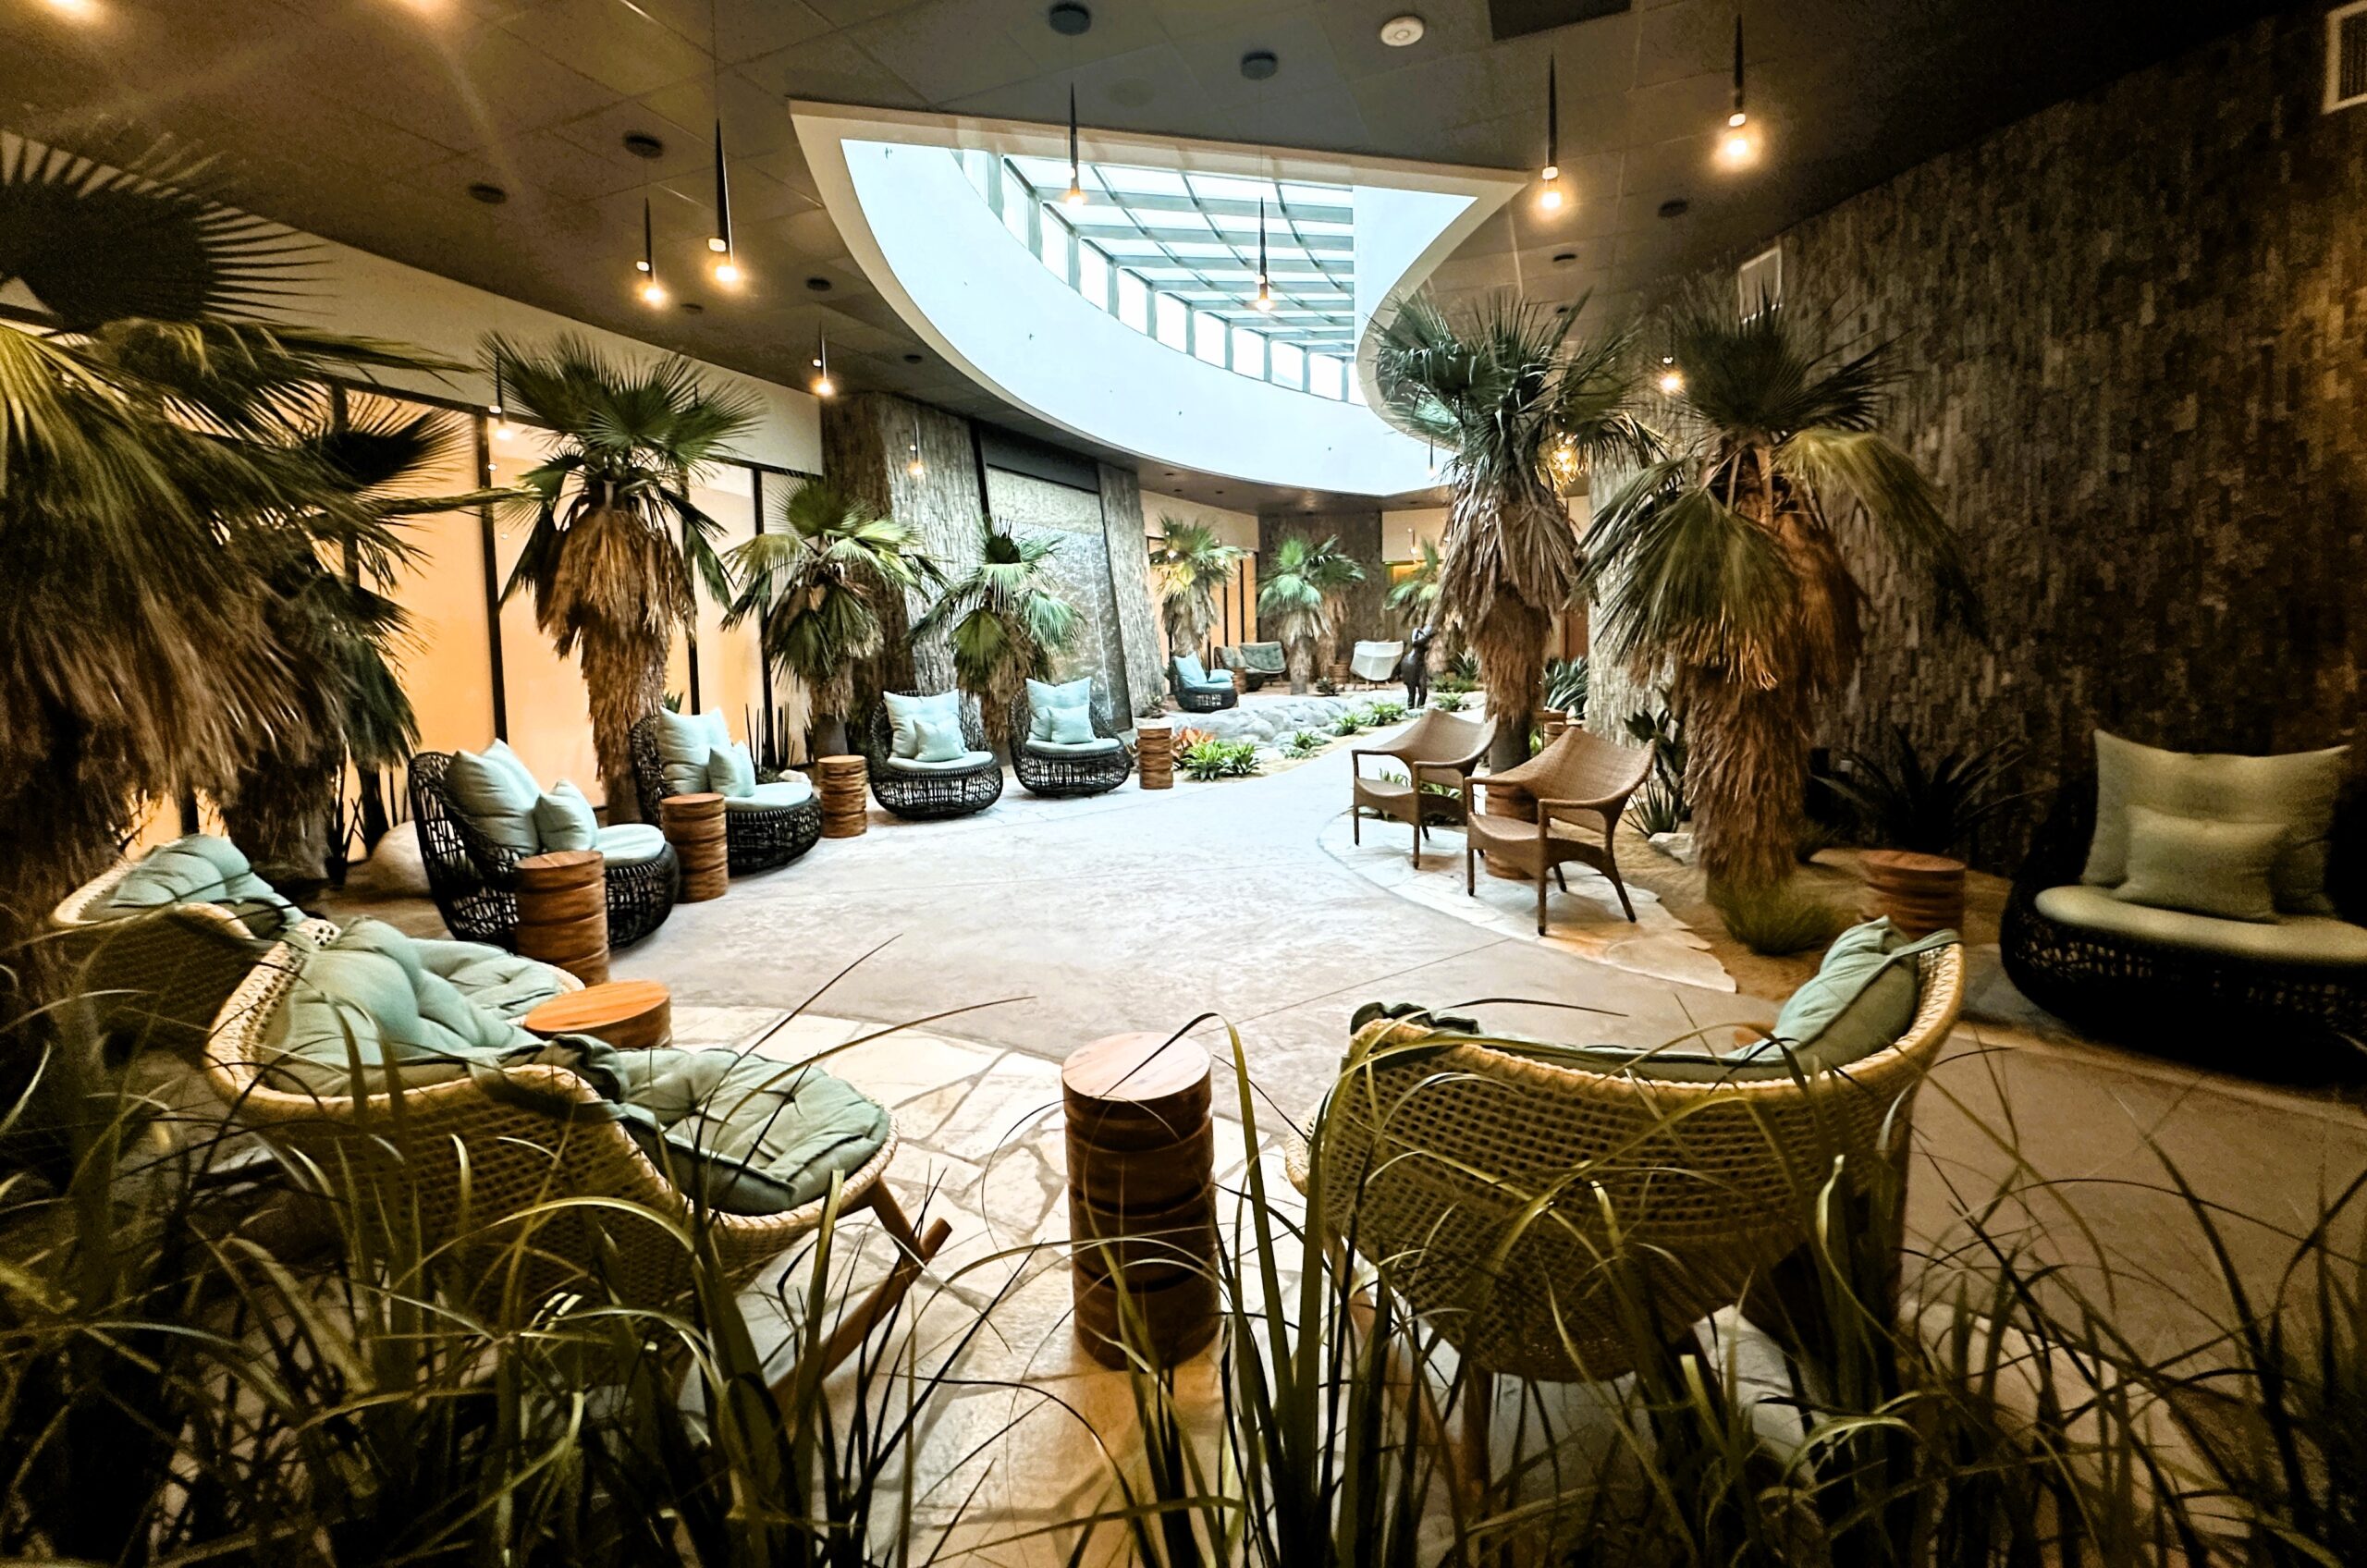 Indoor Tranquility Garden at Séc-he spa in PalmSprings. @Barbara Redding